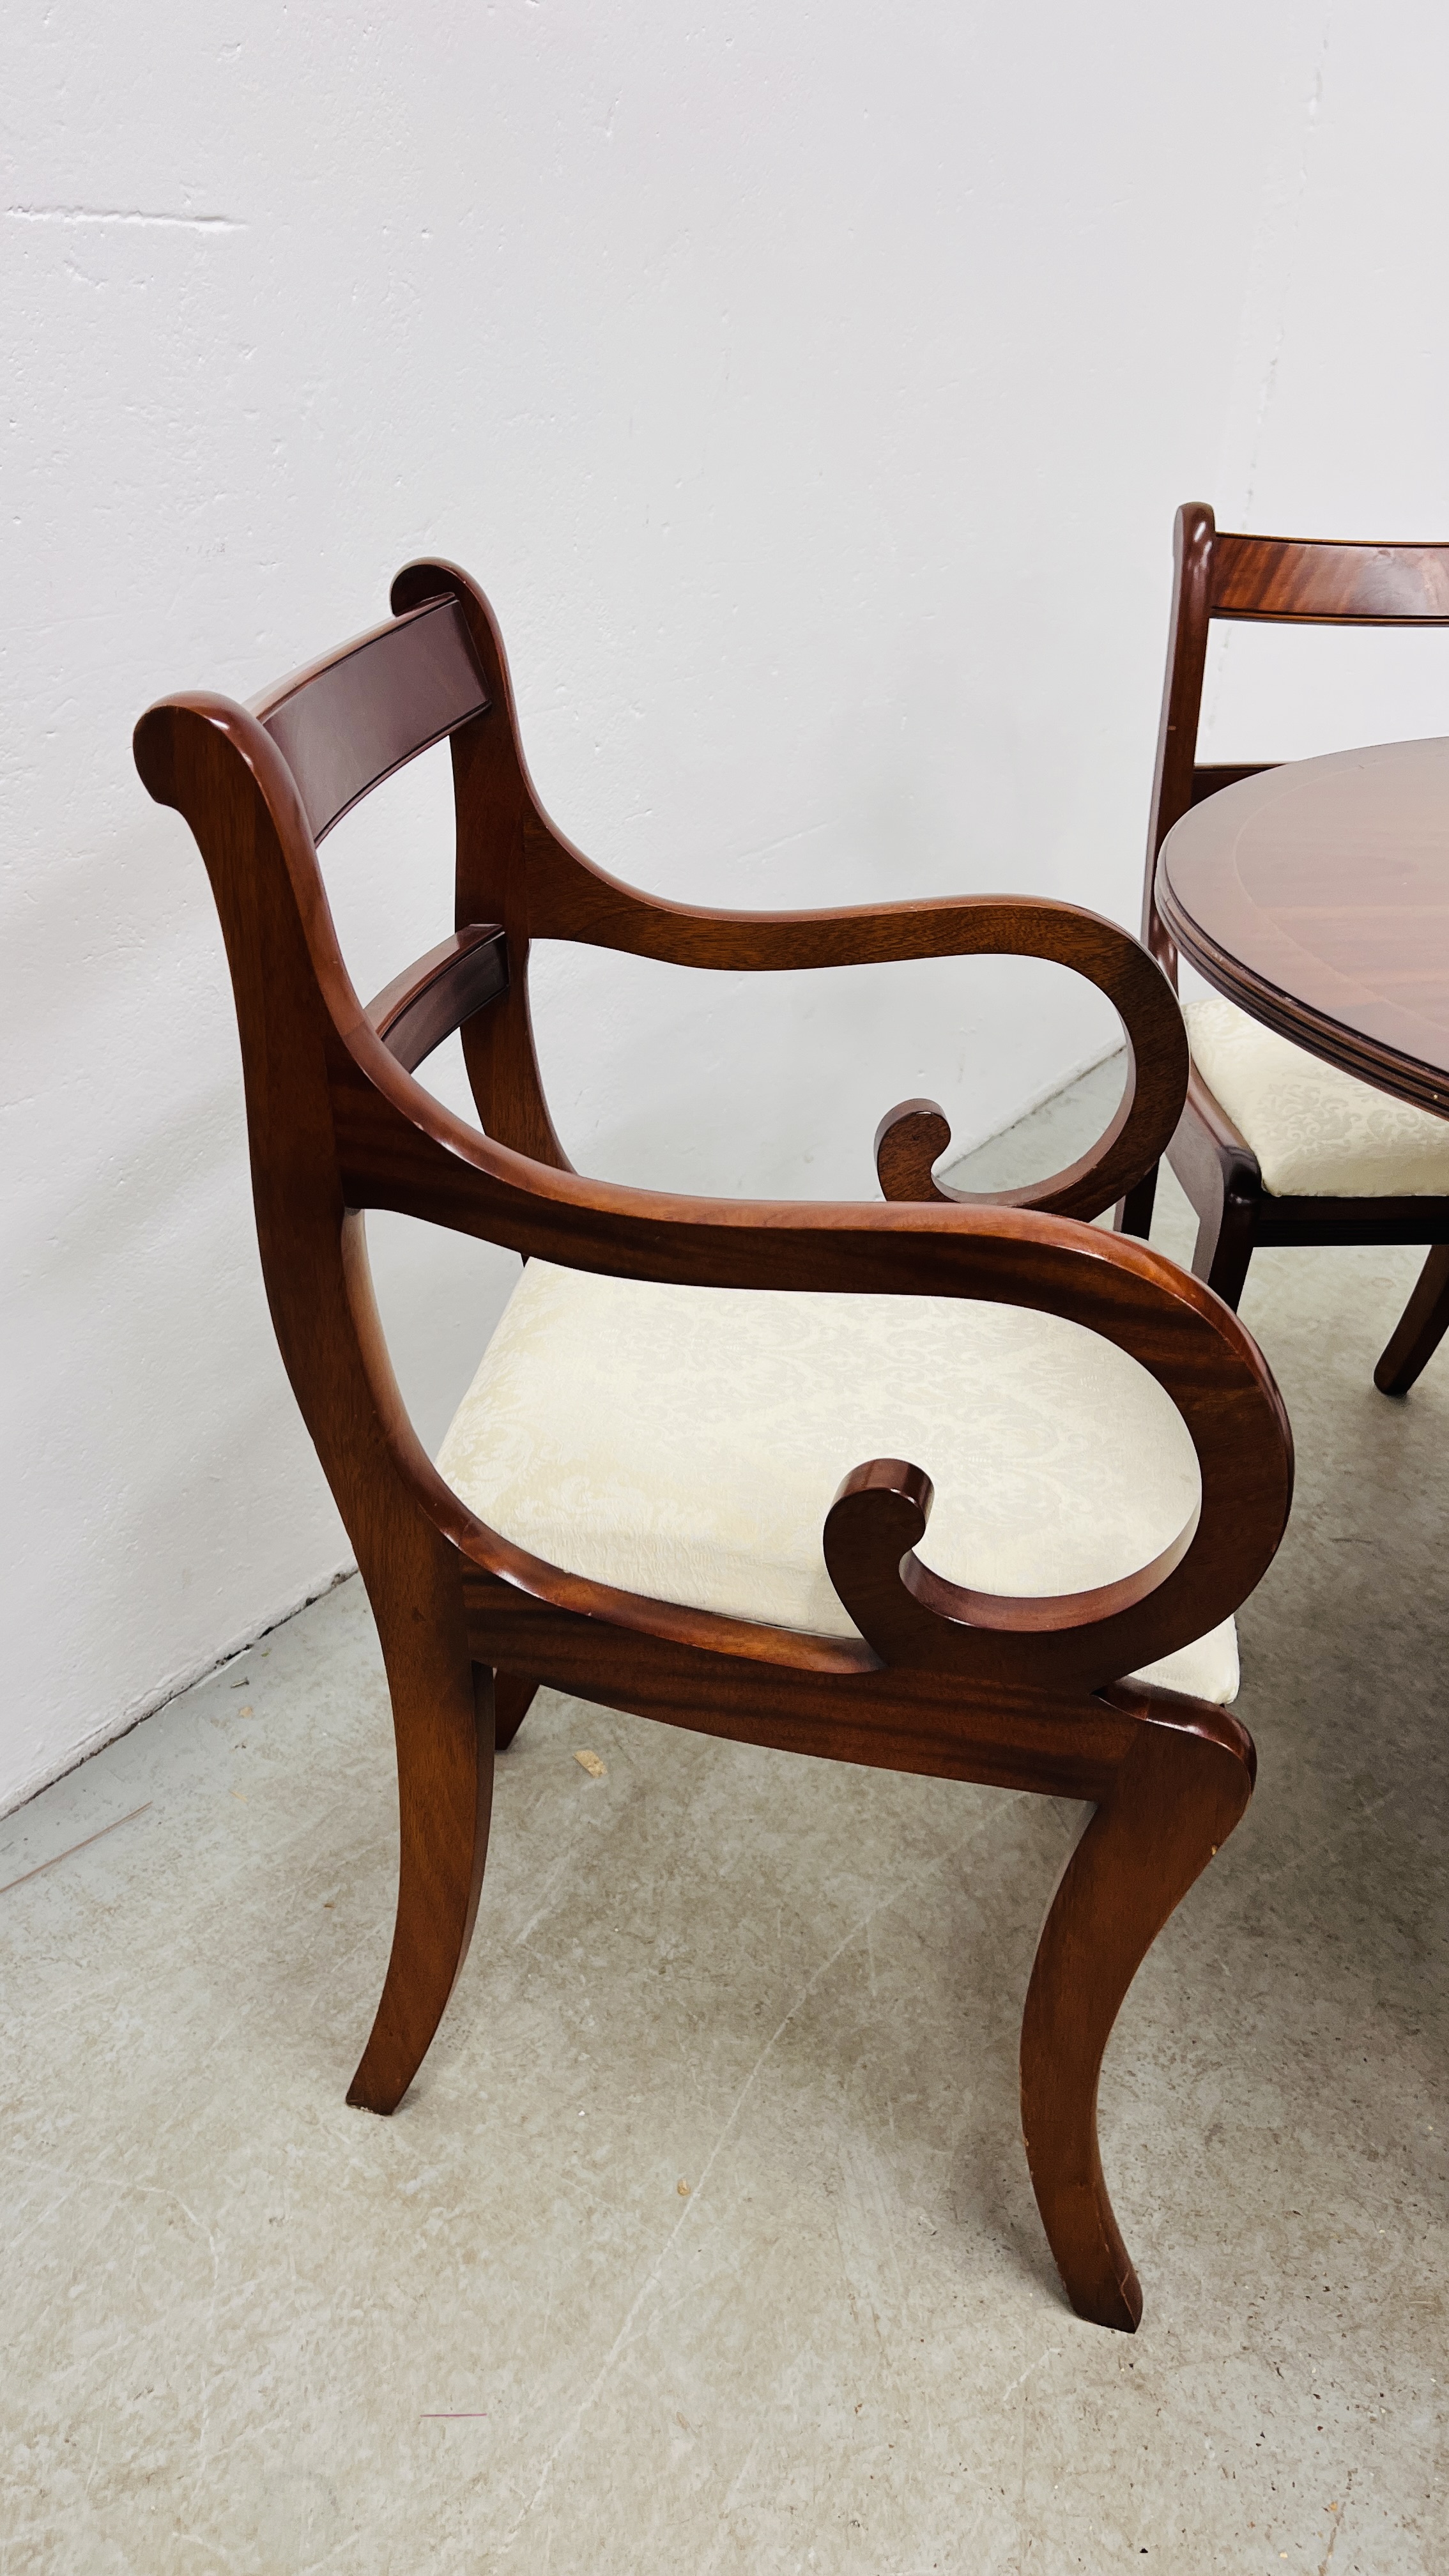 A REPRODUCTION MAHOGANY FINISH EXTENDING DROP LEAF DINING TABLE ALONG WITH 4 MATCHING CHAIRS AND 2 - Image 4 of 8